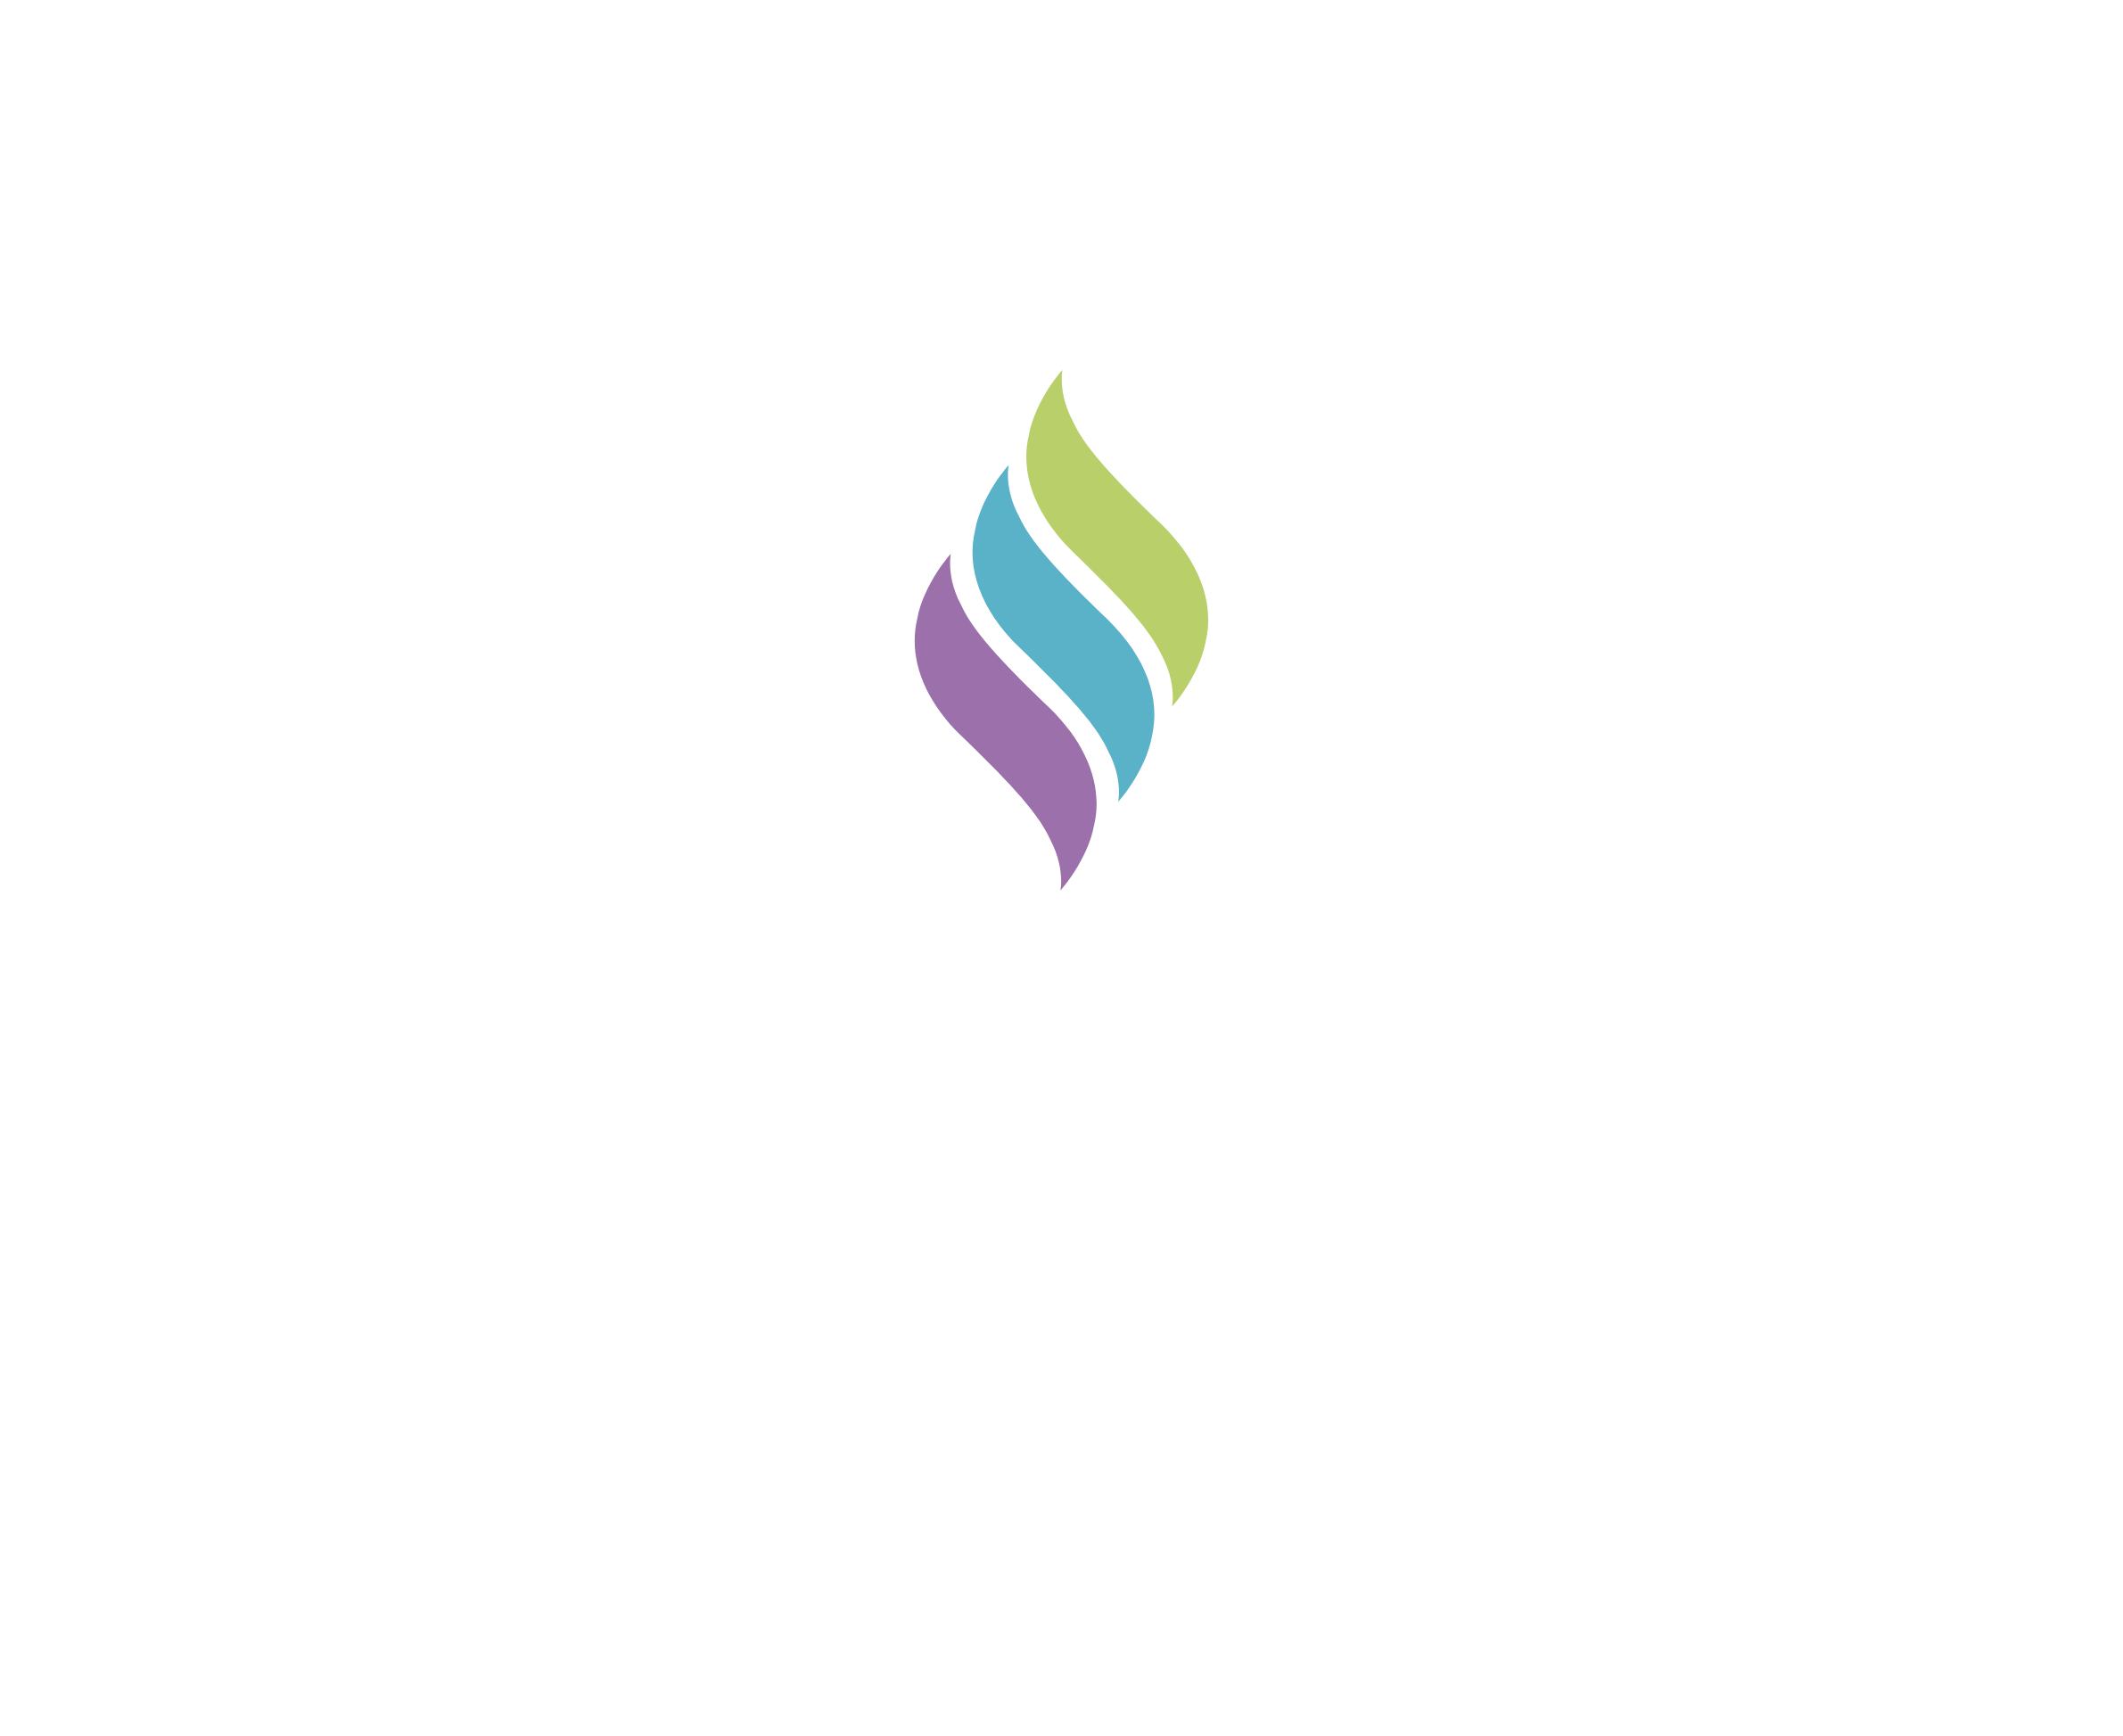 invare-recycling